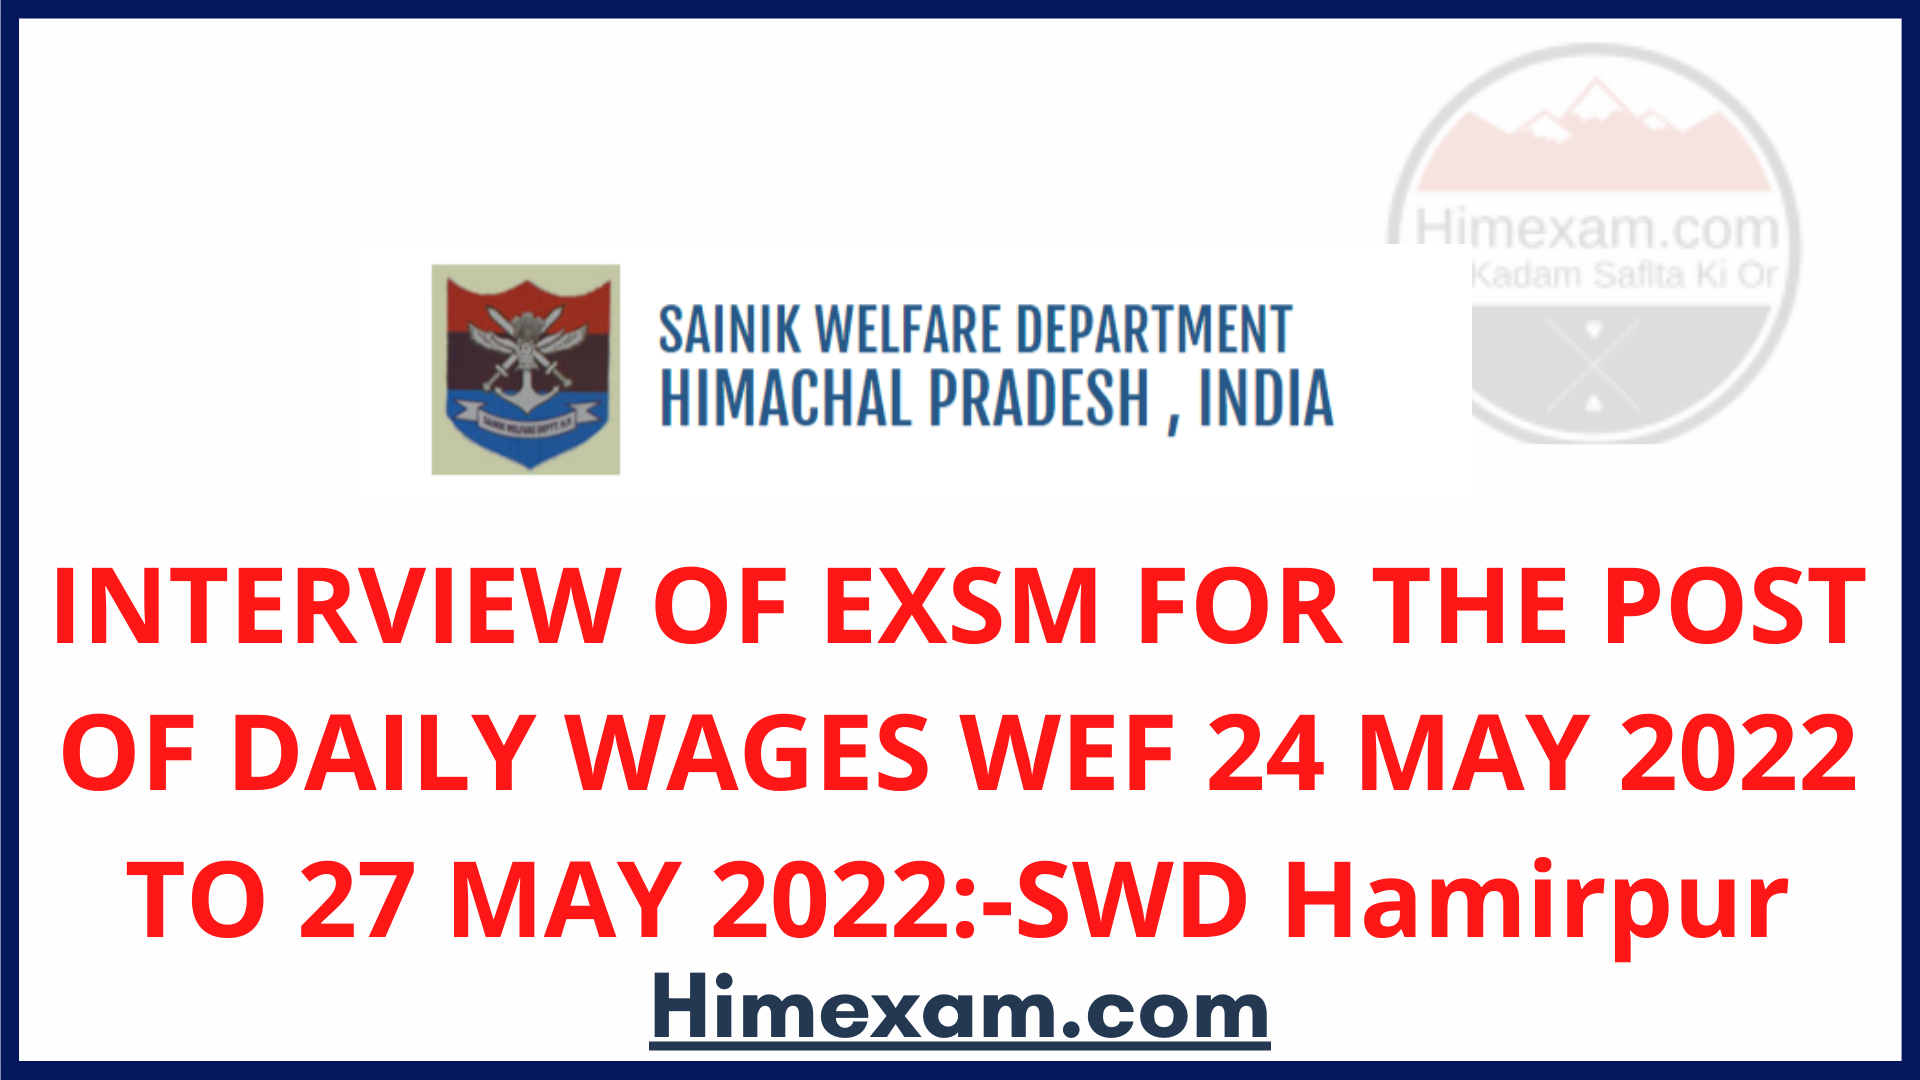 INTERVIEW OF EXSM FOR THE POST OF DAILY WAGES WEF 24 MAY 2022 TO 27 MAY 2022:-SWD Hamirpur